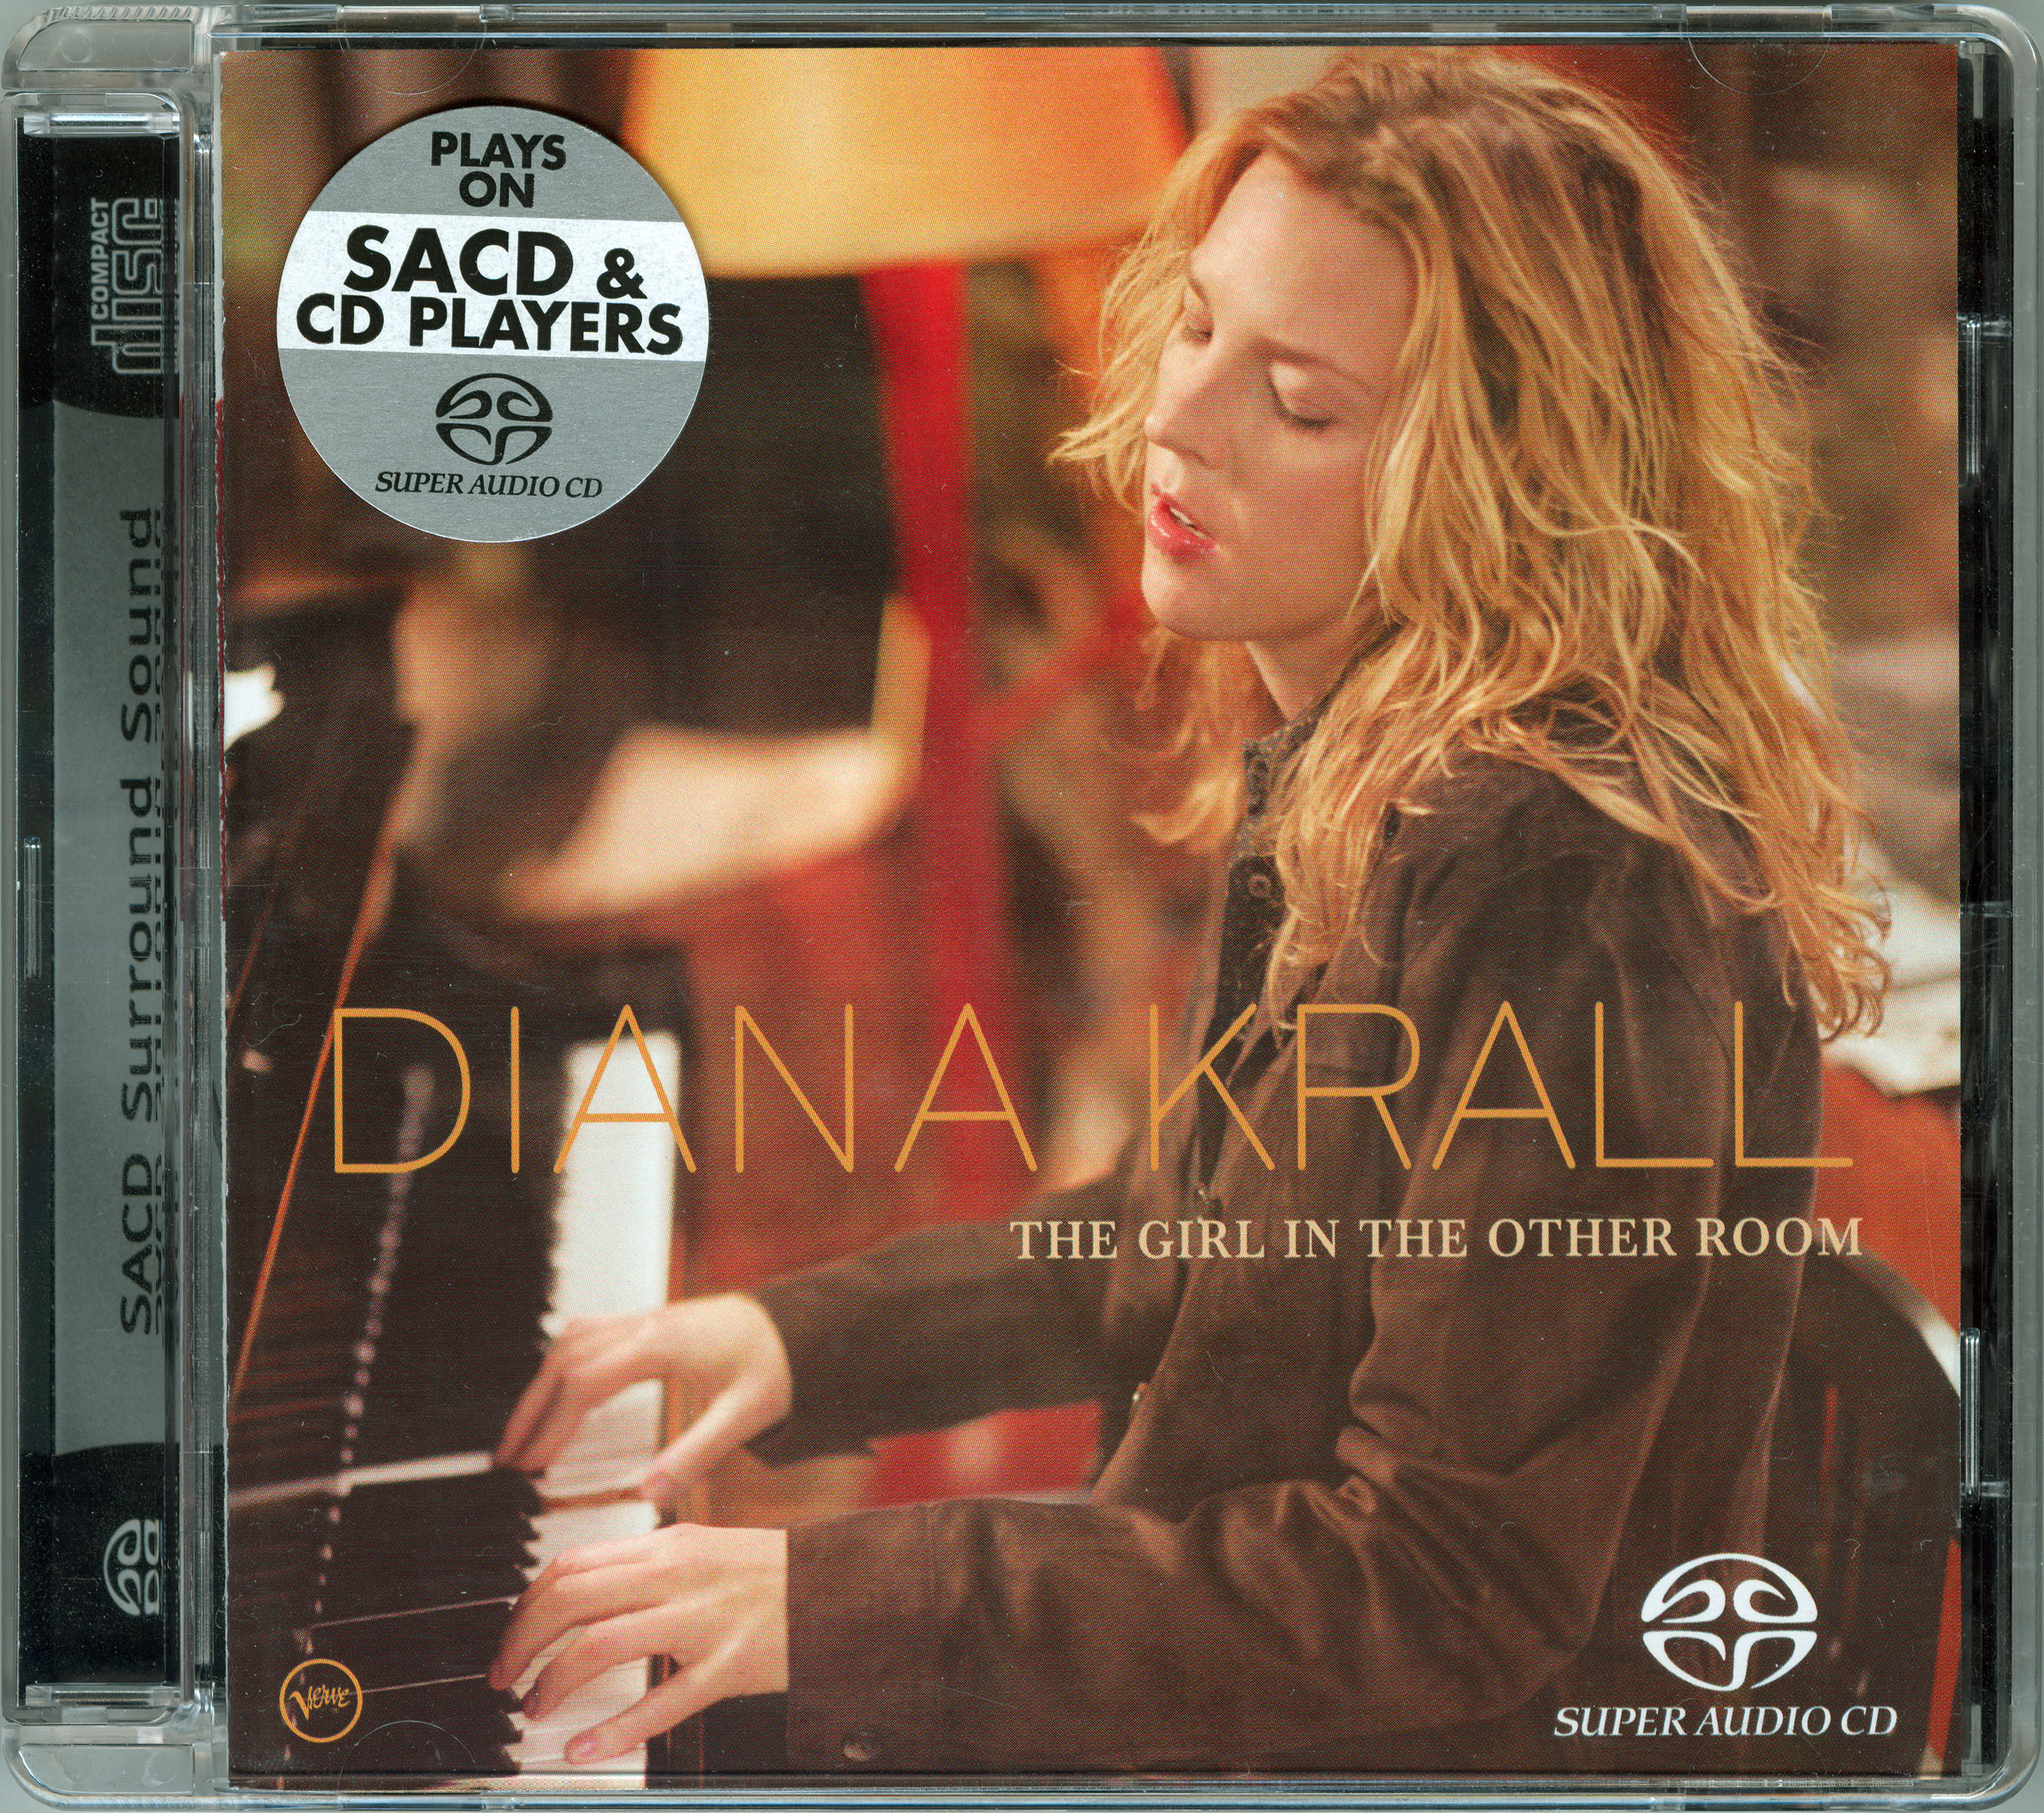 SA119.Diana Krall - (2004) - The Girl In The Other Room SACD-R ISO  DSD 2.0 + 5.1 